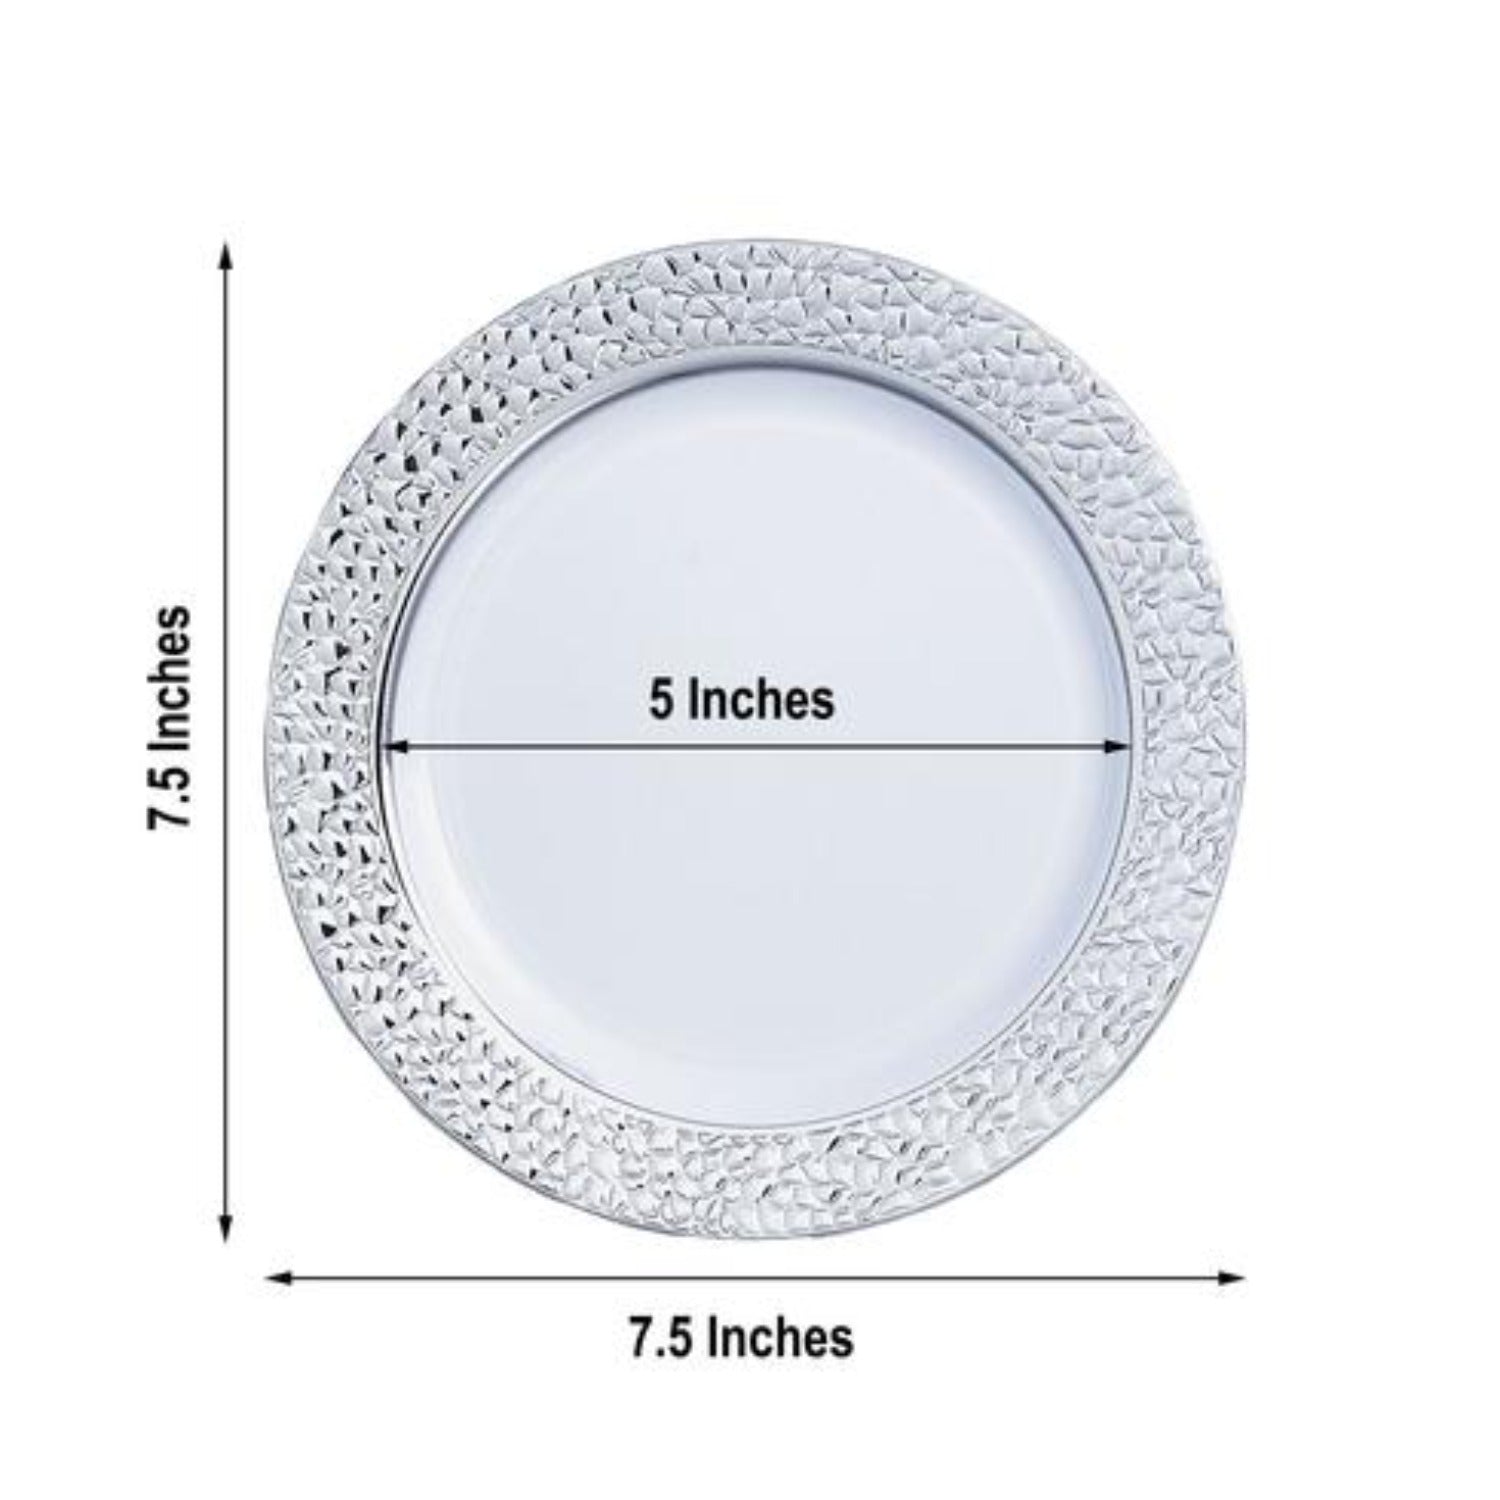 SALE Hammered Collections Salad Dessert Plate White Silver 7.25" 10 count Plates Decorline   